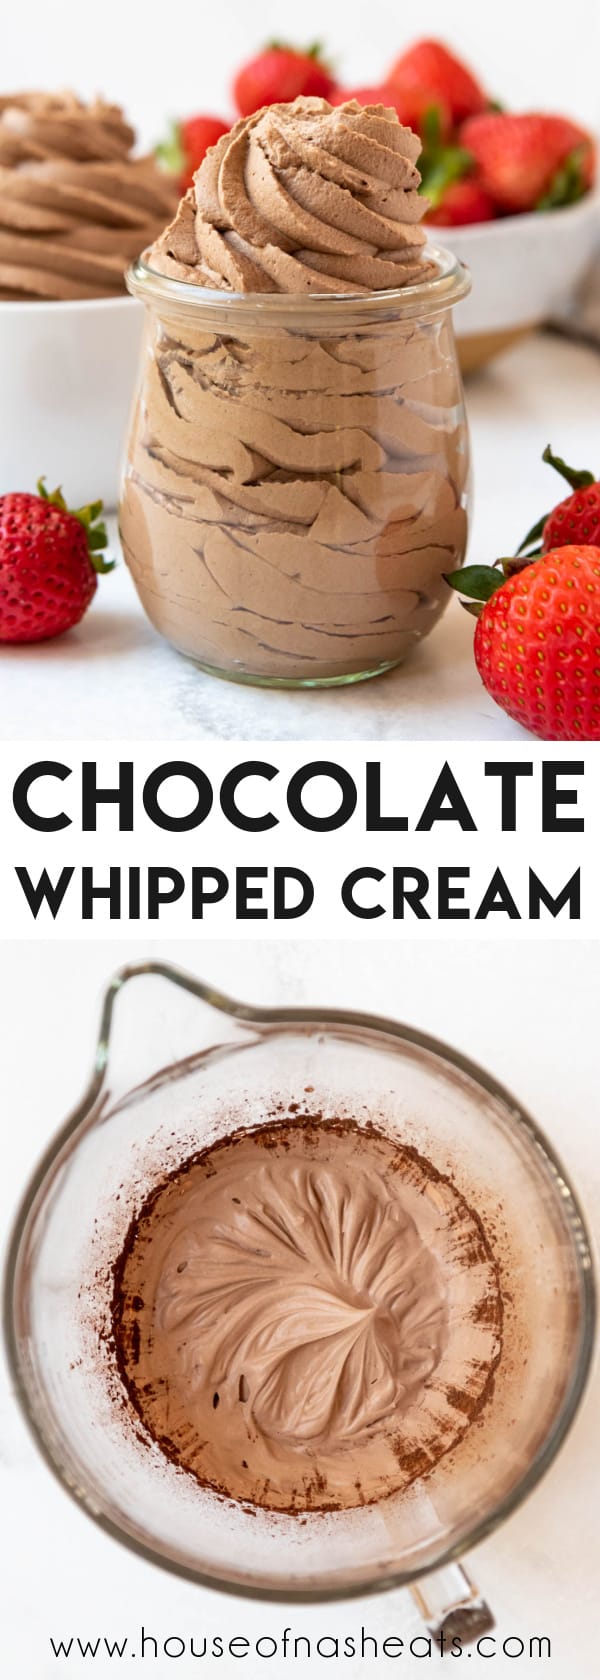 A collage of images of chocolate whipped cream with text overlay.